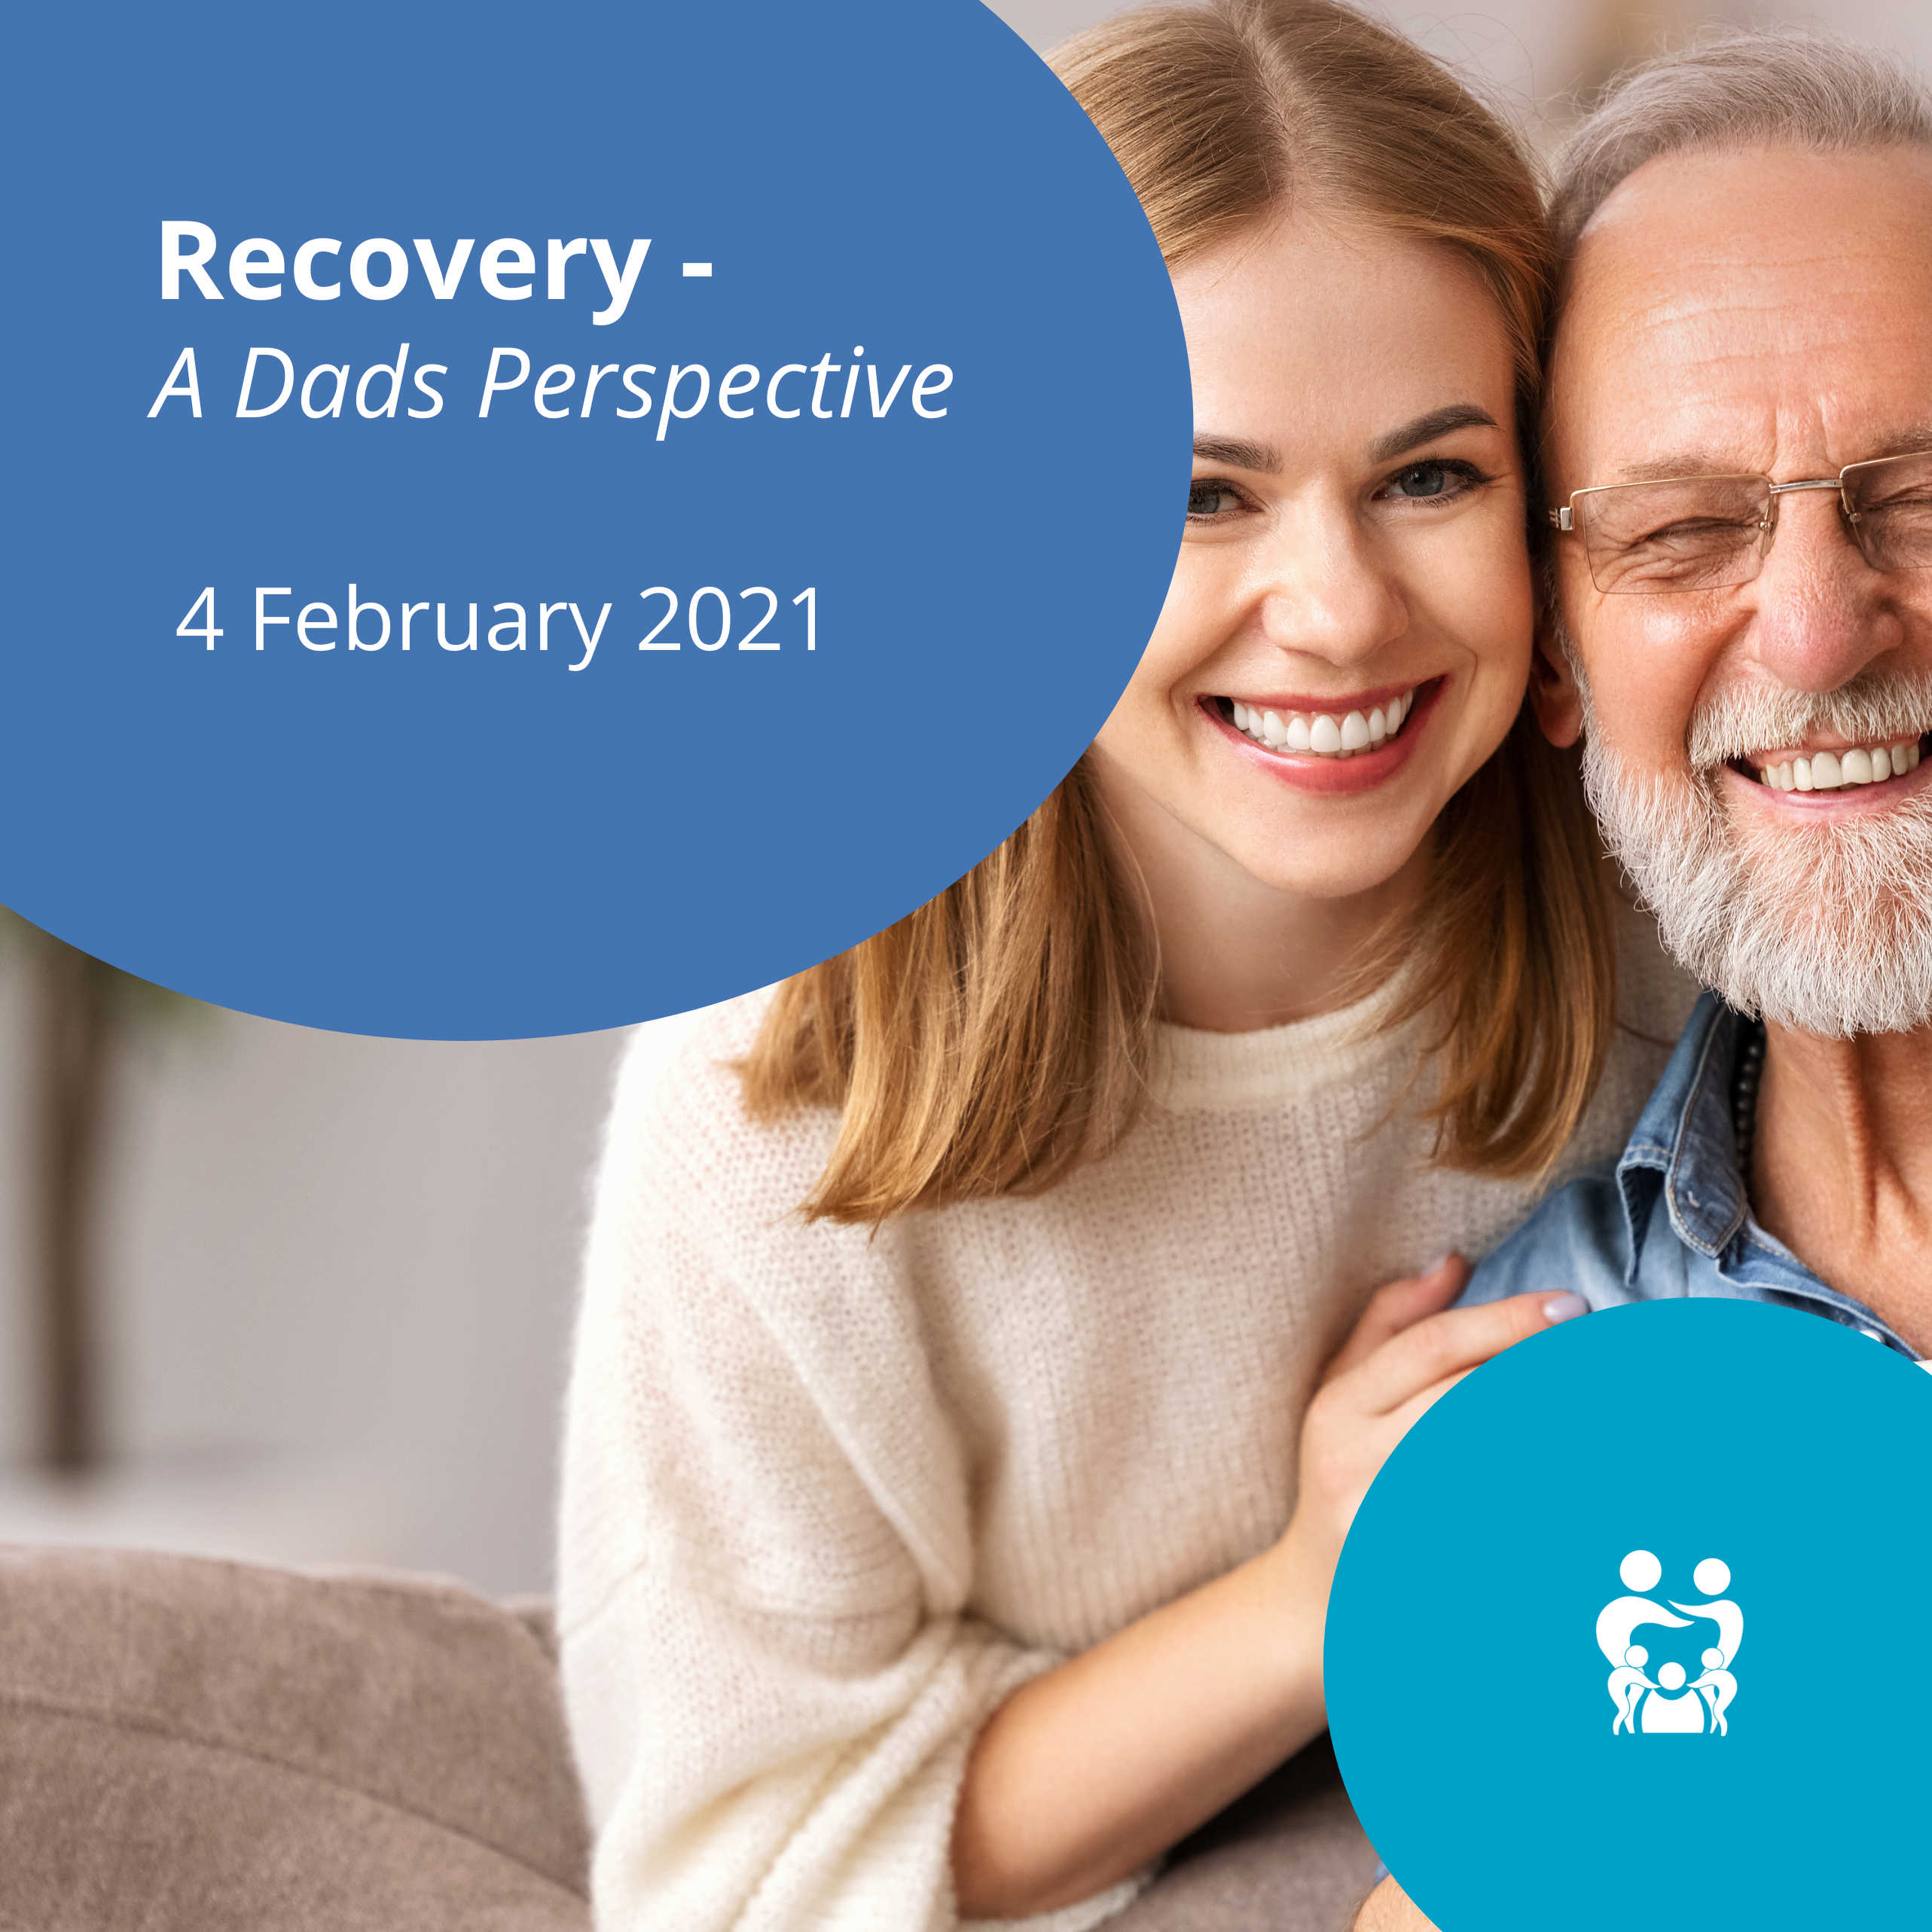 Recovery - Three Dads talk about their journey supporting their child through an eating disorder 4 February 2021